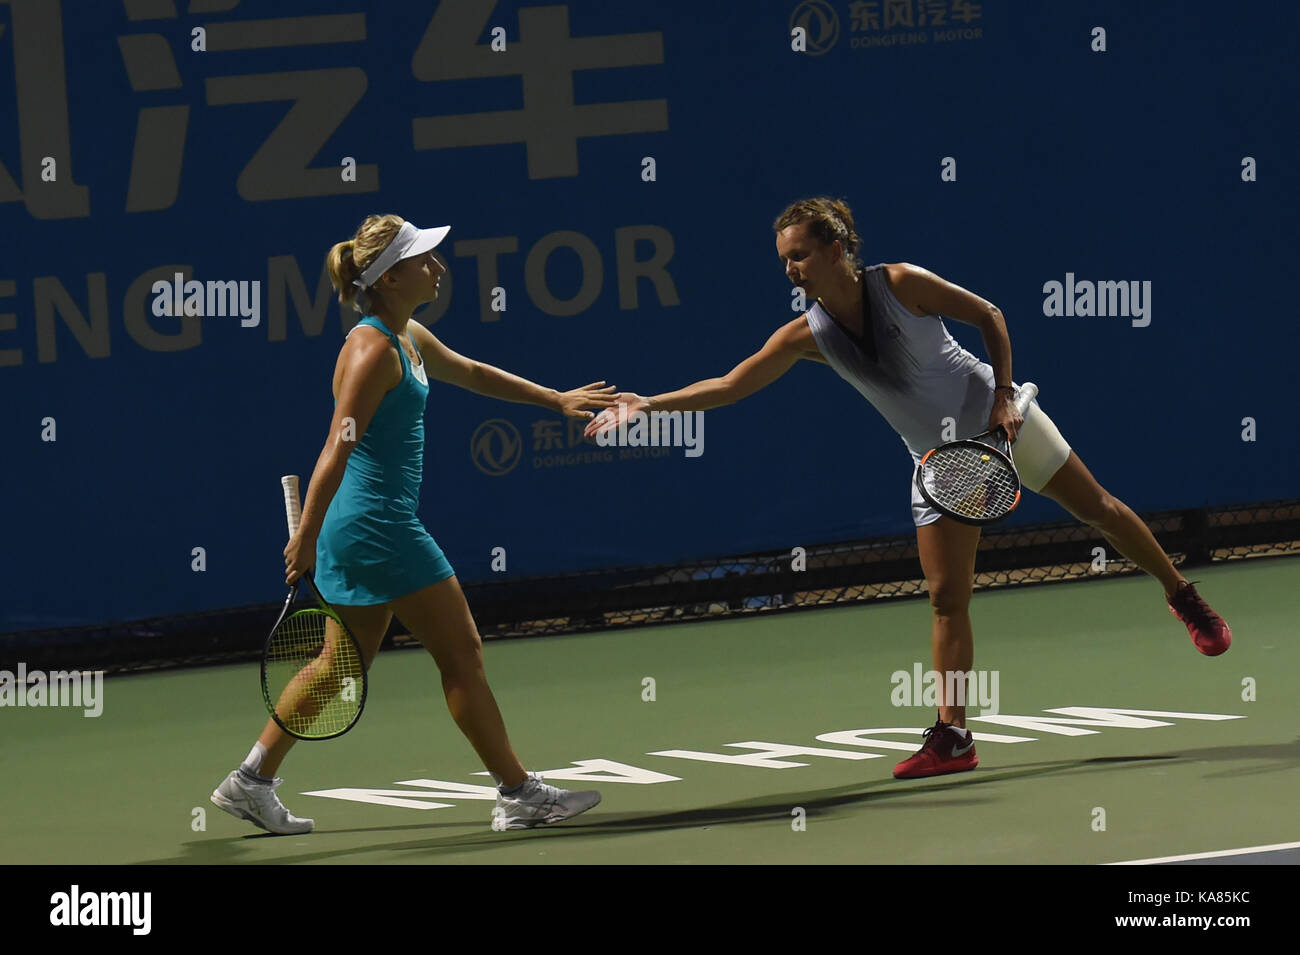 Wuhan, China. 25th September, 2017. Daria Gavrilova(L) of Australia and Barbora Strycova of Czezh Republic compete during the doubles first round match against Nicole Melichar of the United States and Anna Smith of Britain at 2017 WTA Wuhan Open in Wuhan, capital of central China's Hubei Province, on Sept. 25, 2017. Nicole Melichar and Anna Smith won 2-0. Credit: Xinhua/Alamy Live News Stock Photo